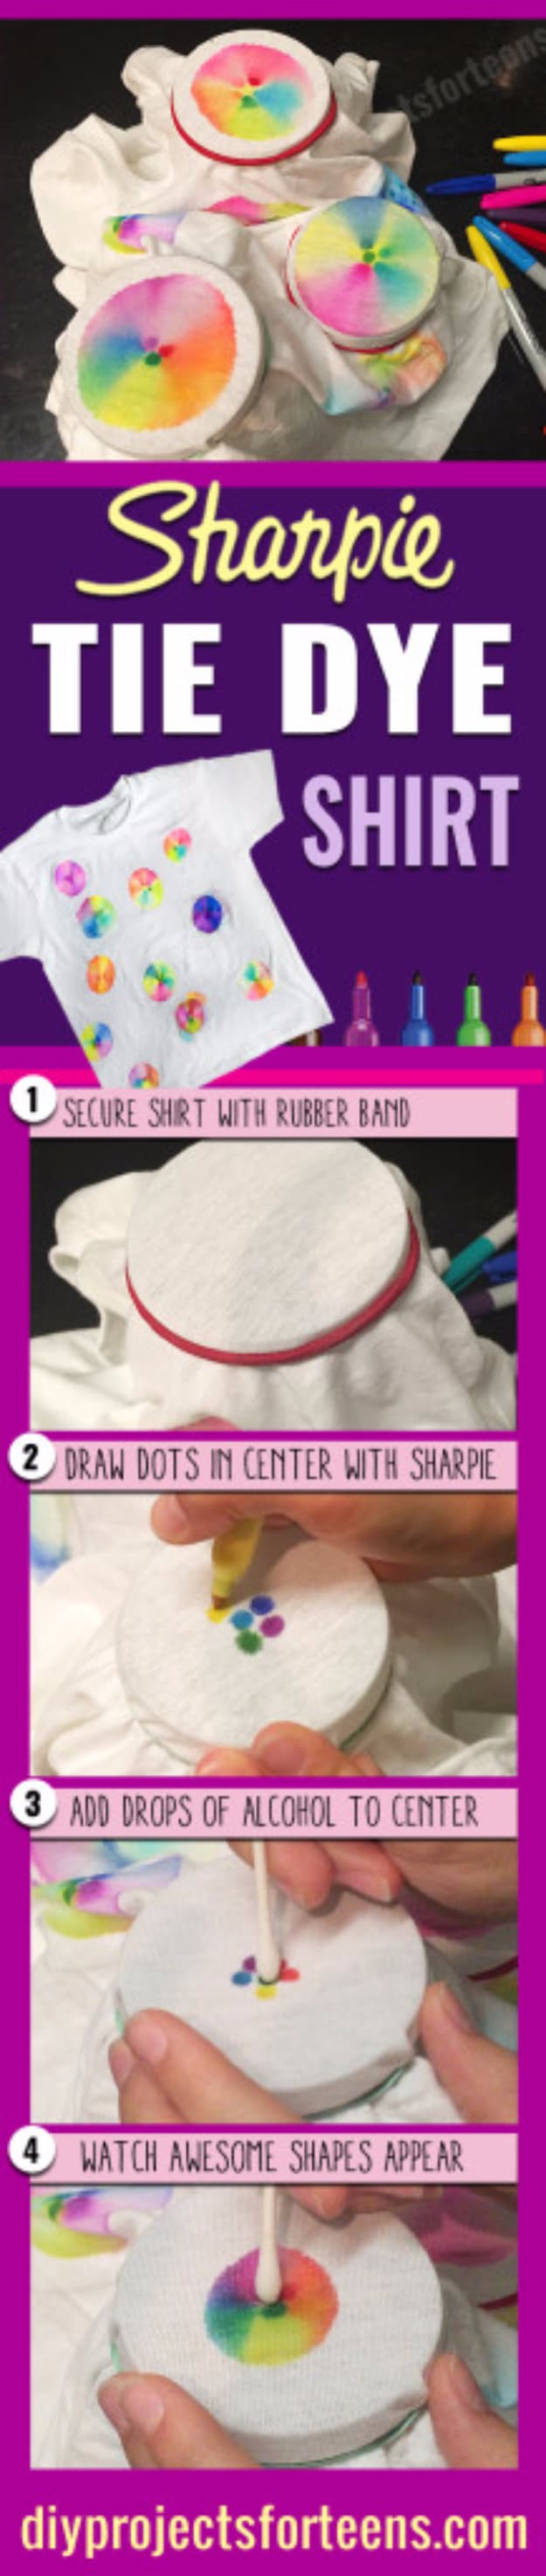 DIY Sharpie Crafts - Sharpie Tie Dye Shirt - Cool and Easy Craft Projects and DIY Ideas Using Sharpies - Use Markers To Decorate and Design Home Decor, Cool Homemade Gifts, T-Shirts, Shoes and Wall Art. Creative Project Tutorials for Teens, Kids and Adults #sharpiecrafts #diyideas #cheapcrafts